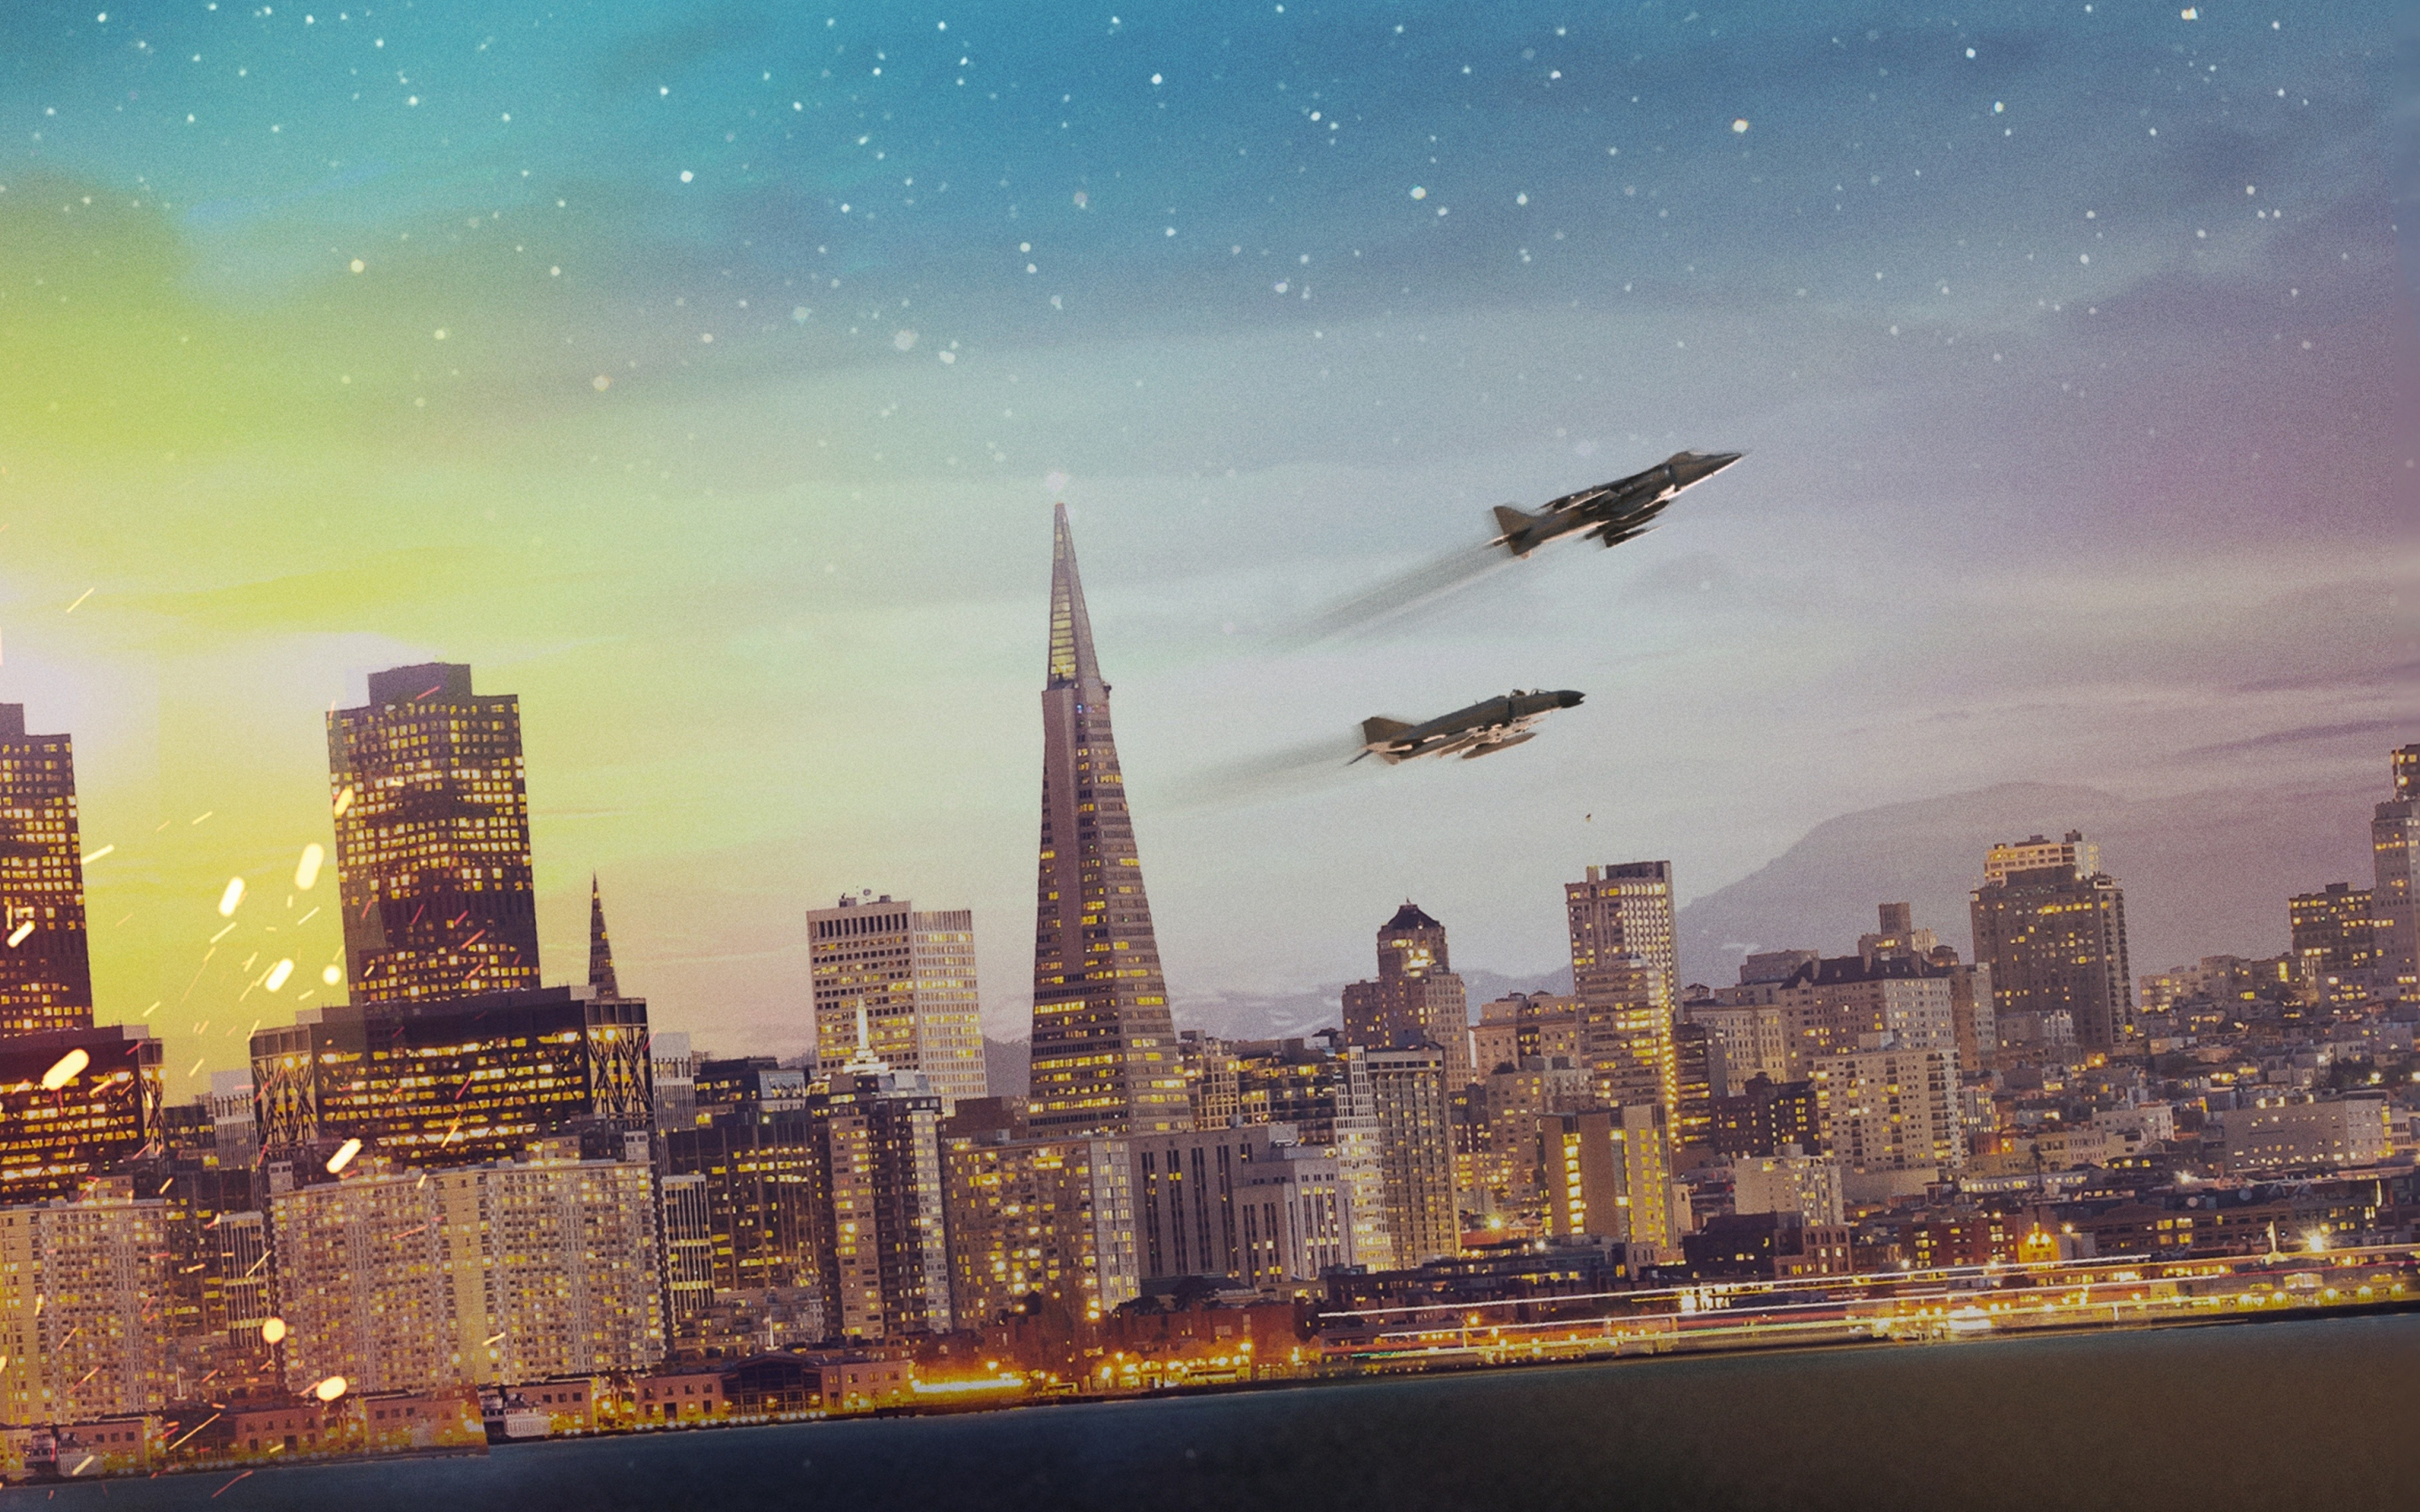 City, buildings, starry sky, aircrafts, 2880x1800 wallpaper